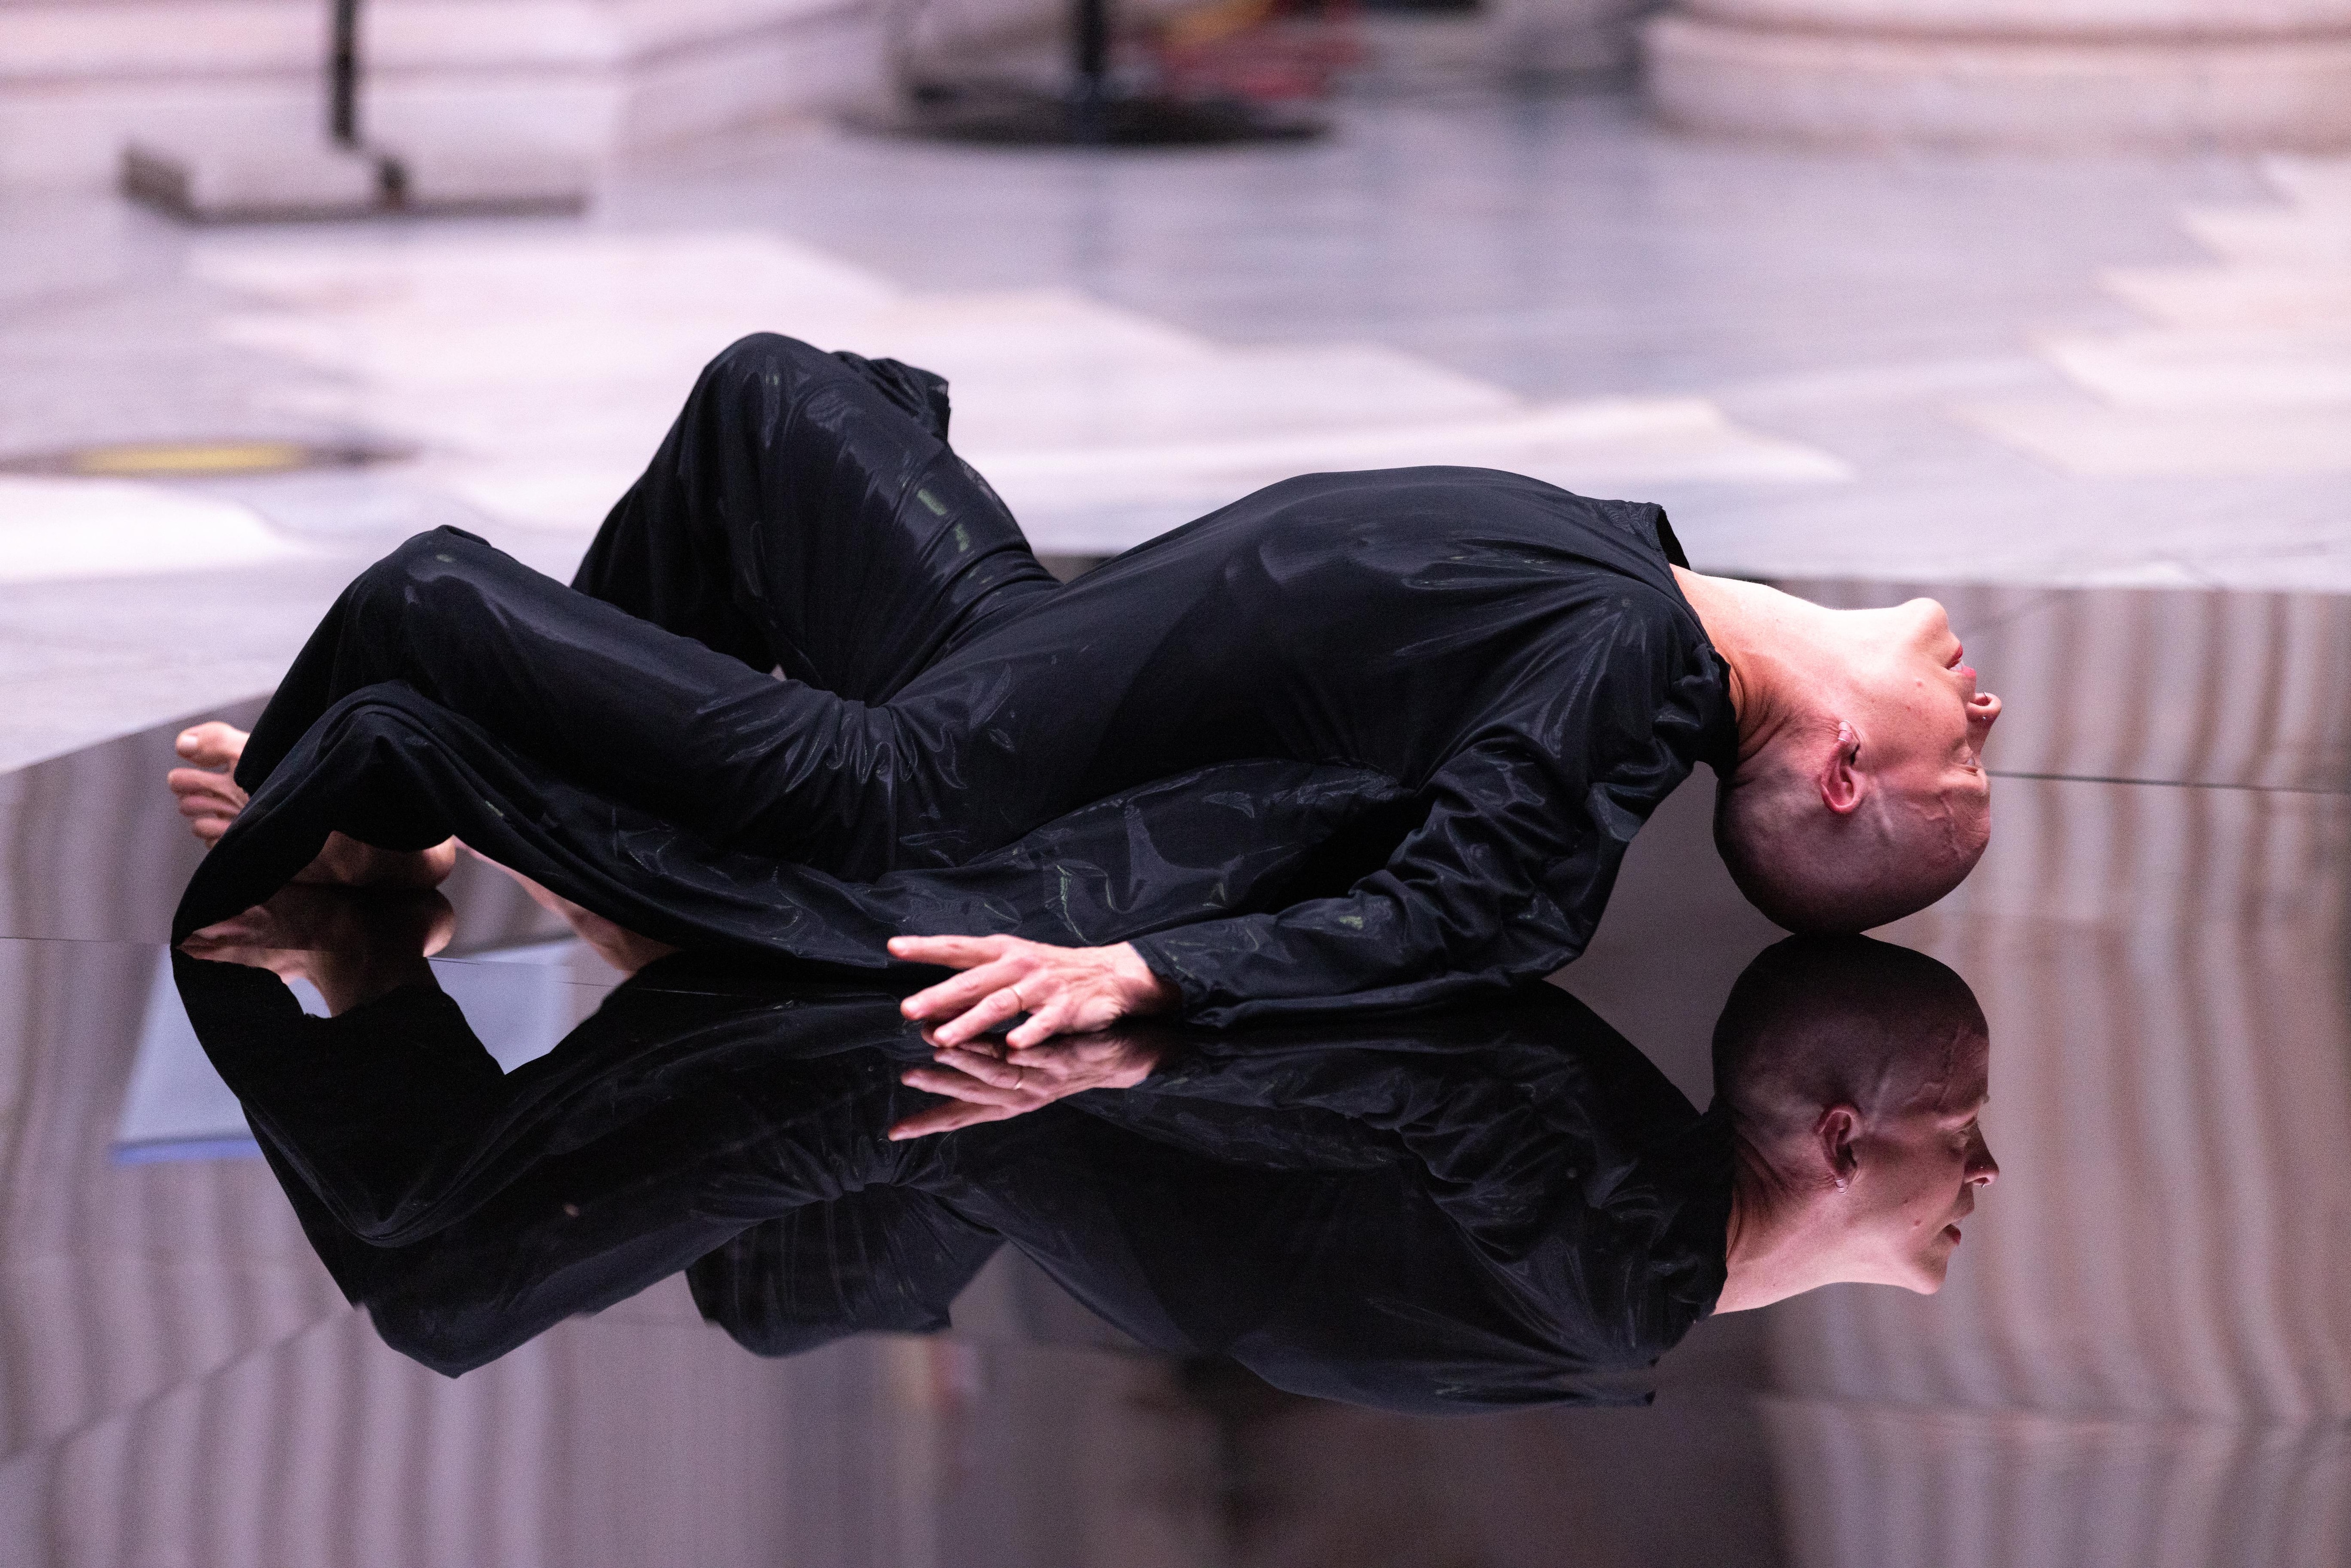 Bald woman dressed in black, lying on a reflective floor